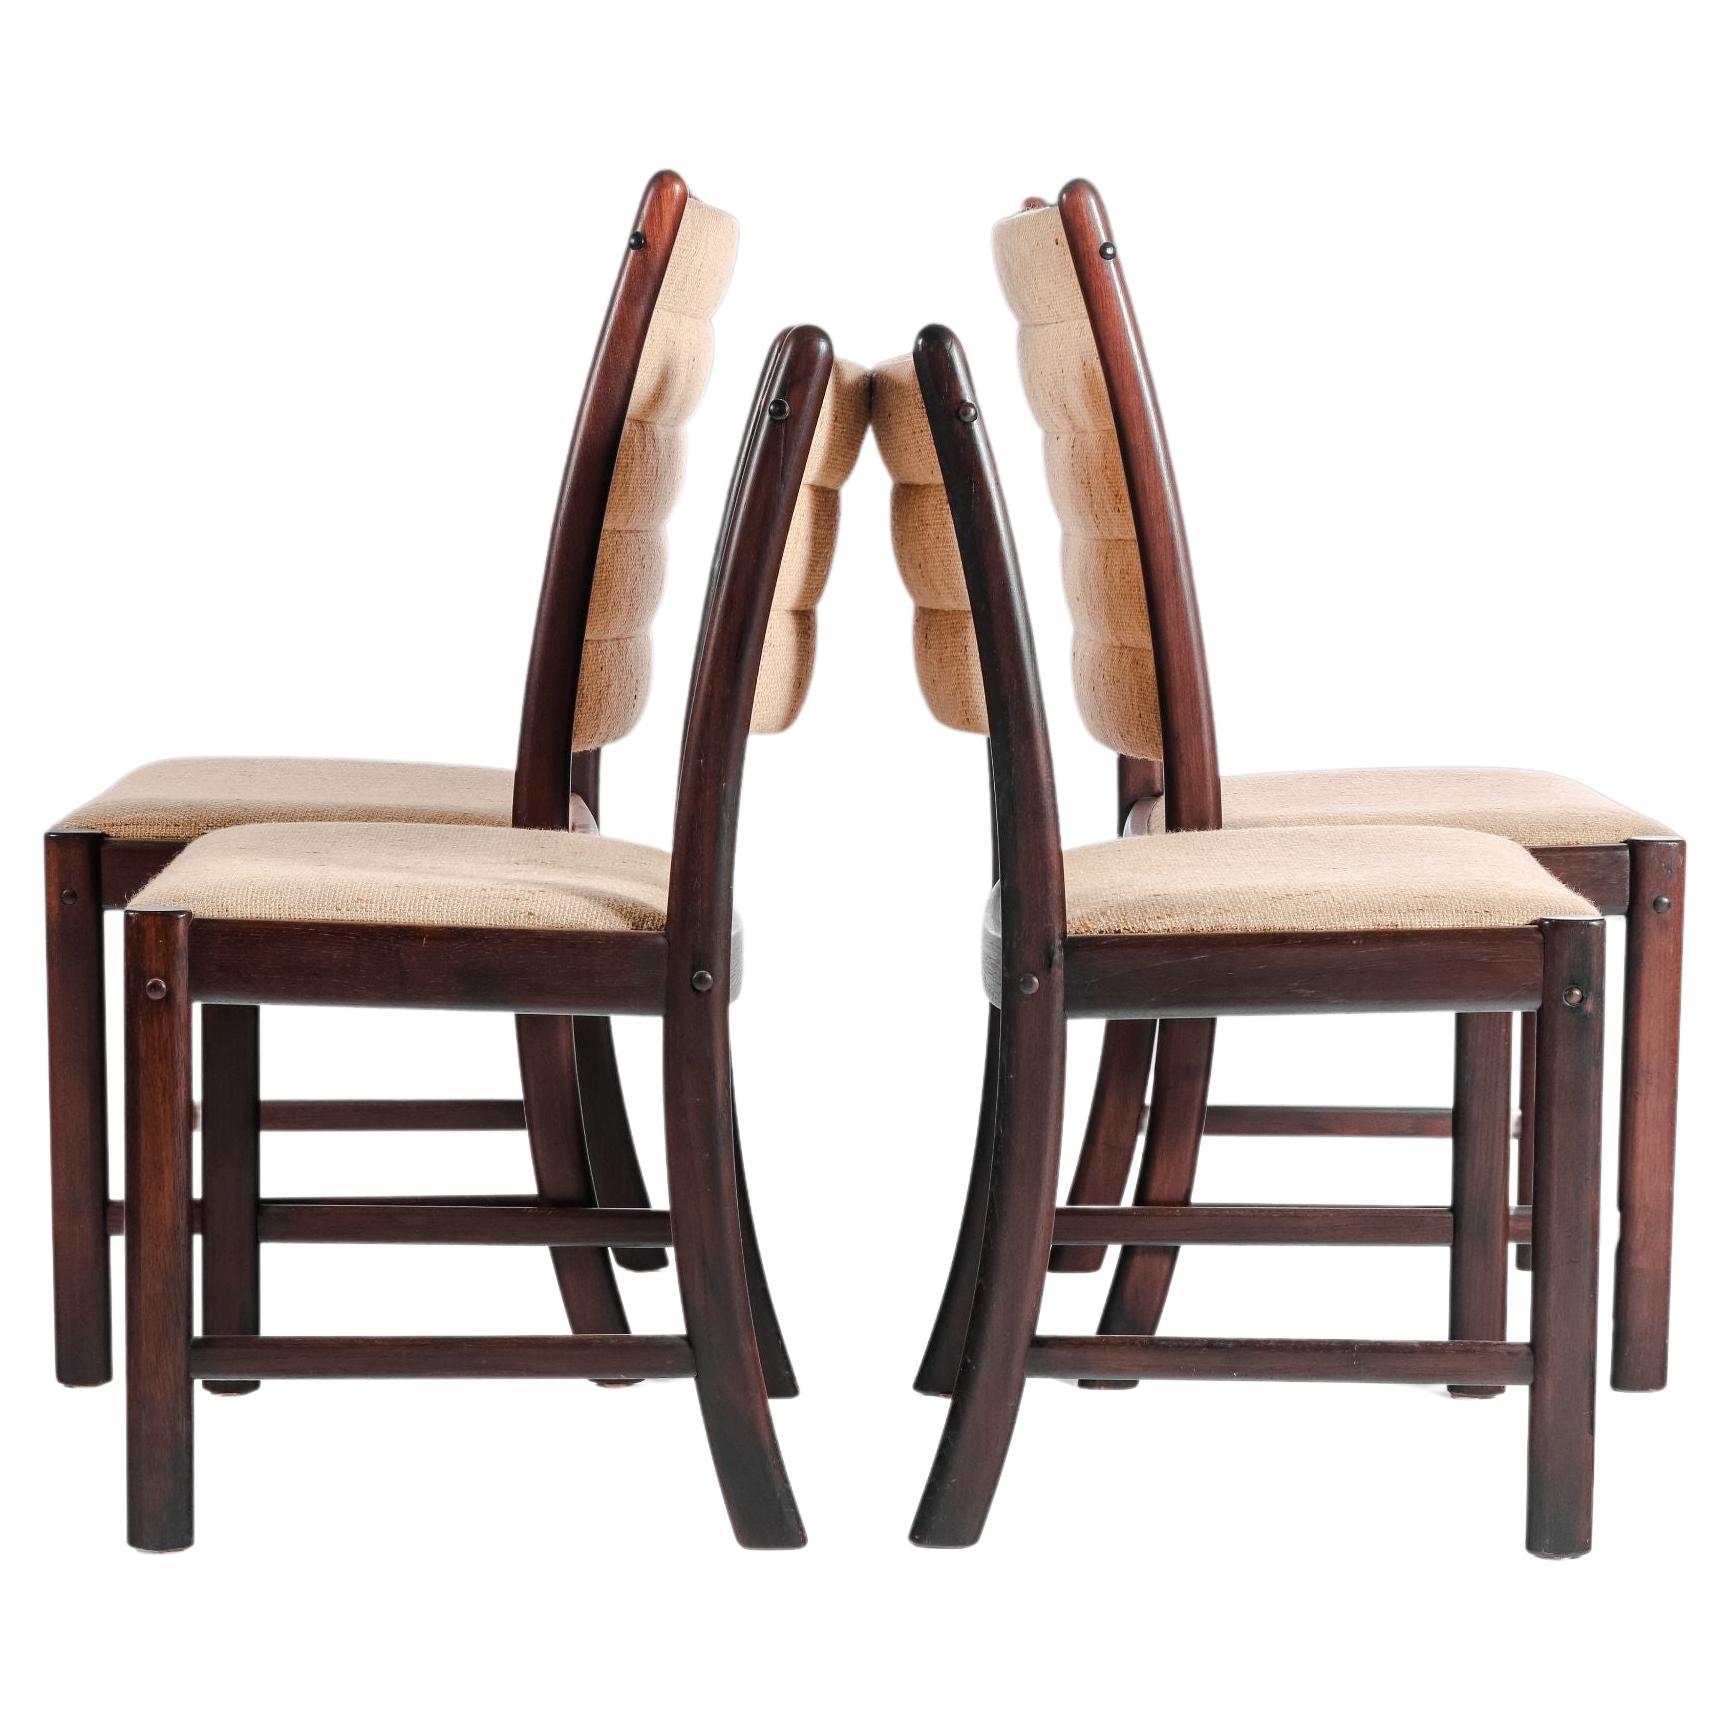 Set of Four (4) Danish Modern Dining Chairs in Afromosia & Original Fabric, 1970 For Sale